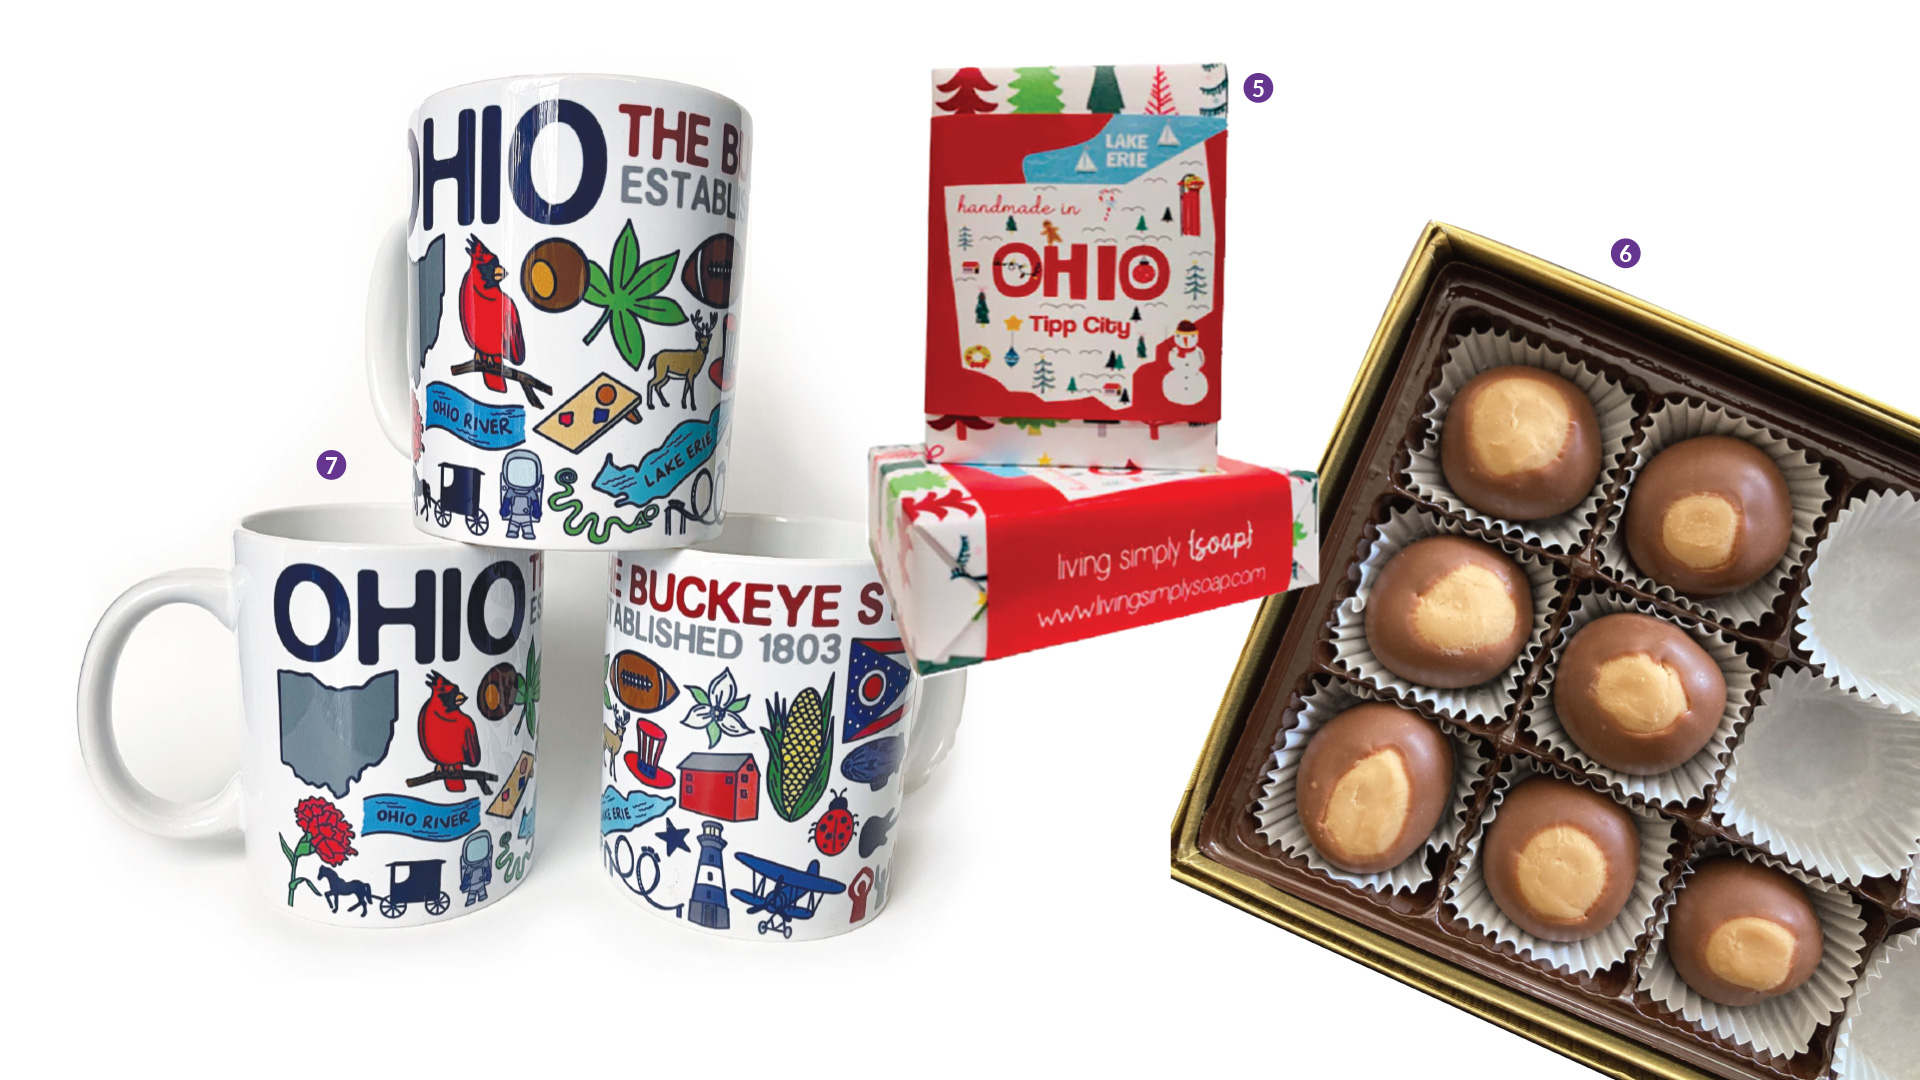 Ohio-themed meeting gifts 5-7 (photos courtesy of businesses listed and Rachael Jirousek)